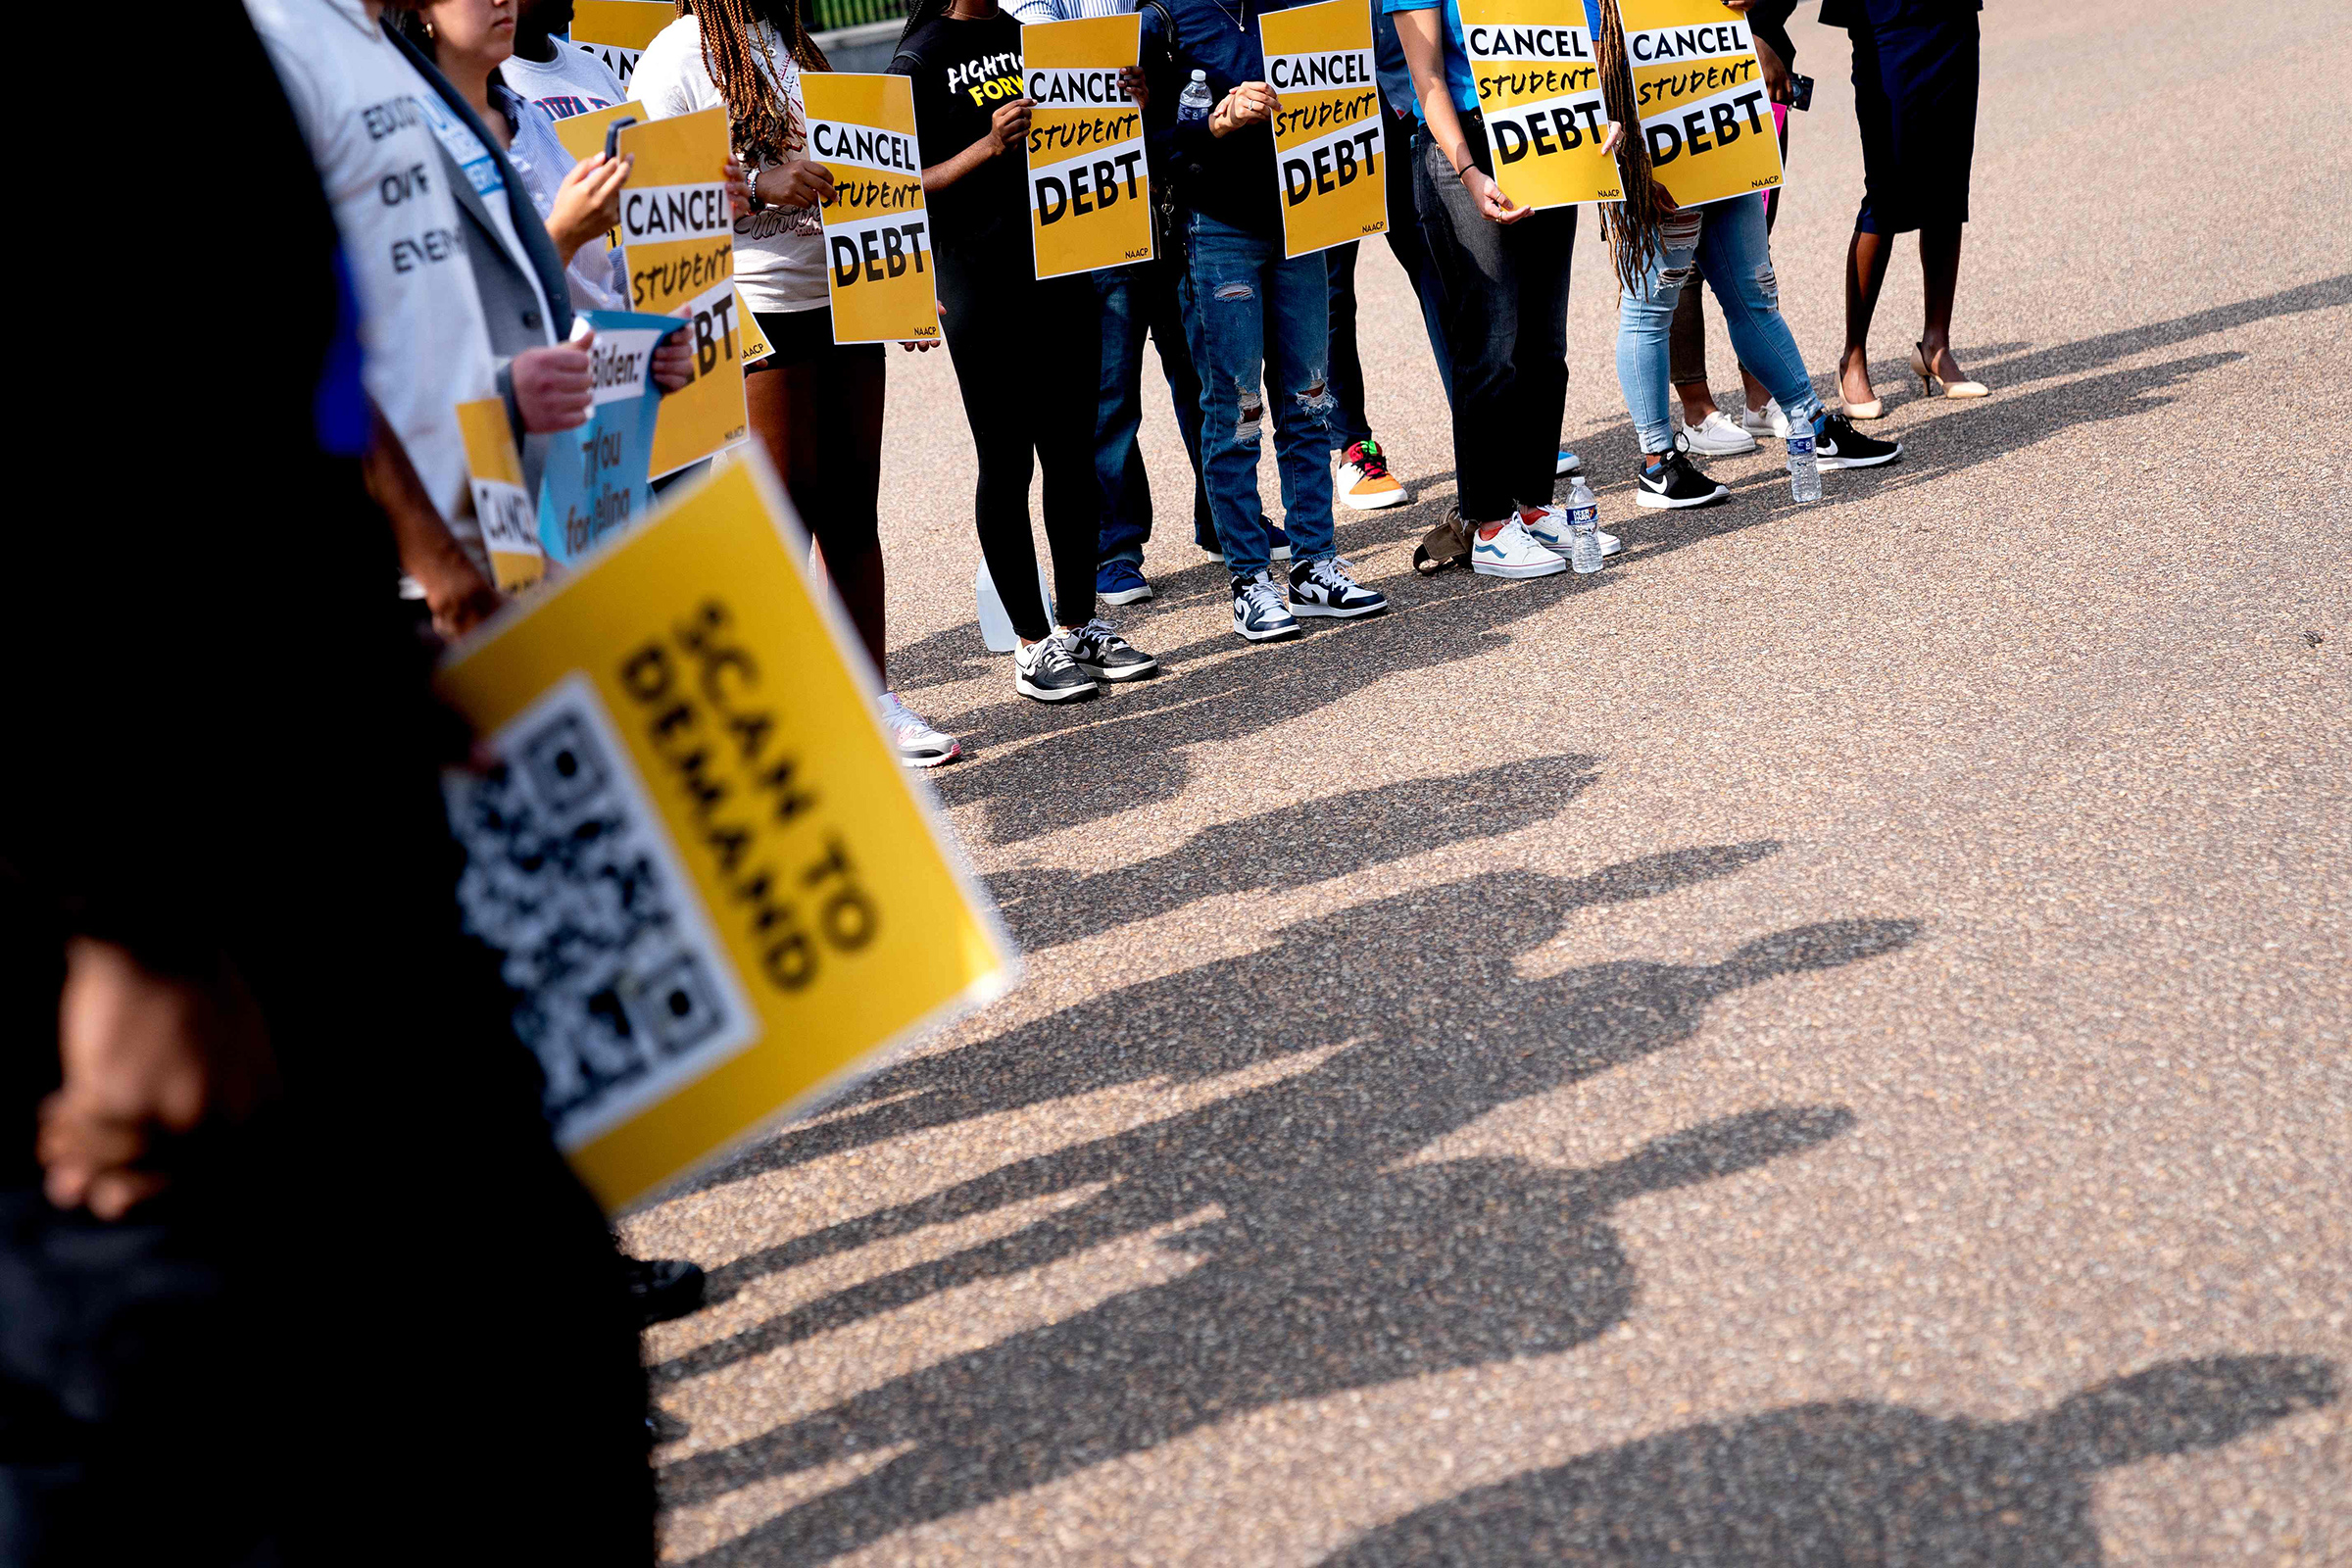 Activists hold cancel student debt signs as they gather to rally in front of the White House in Washington D.C., Aug. 25, 2022. (Stefani Reynolds—AFP/Getty Images)